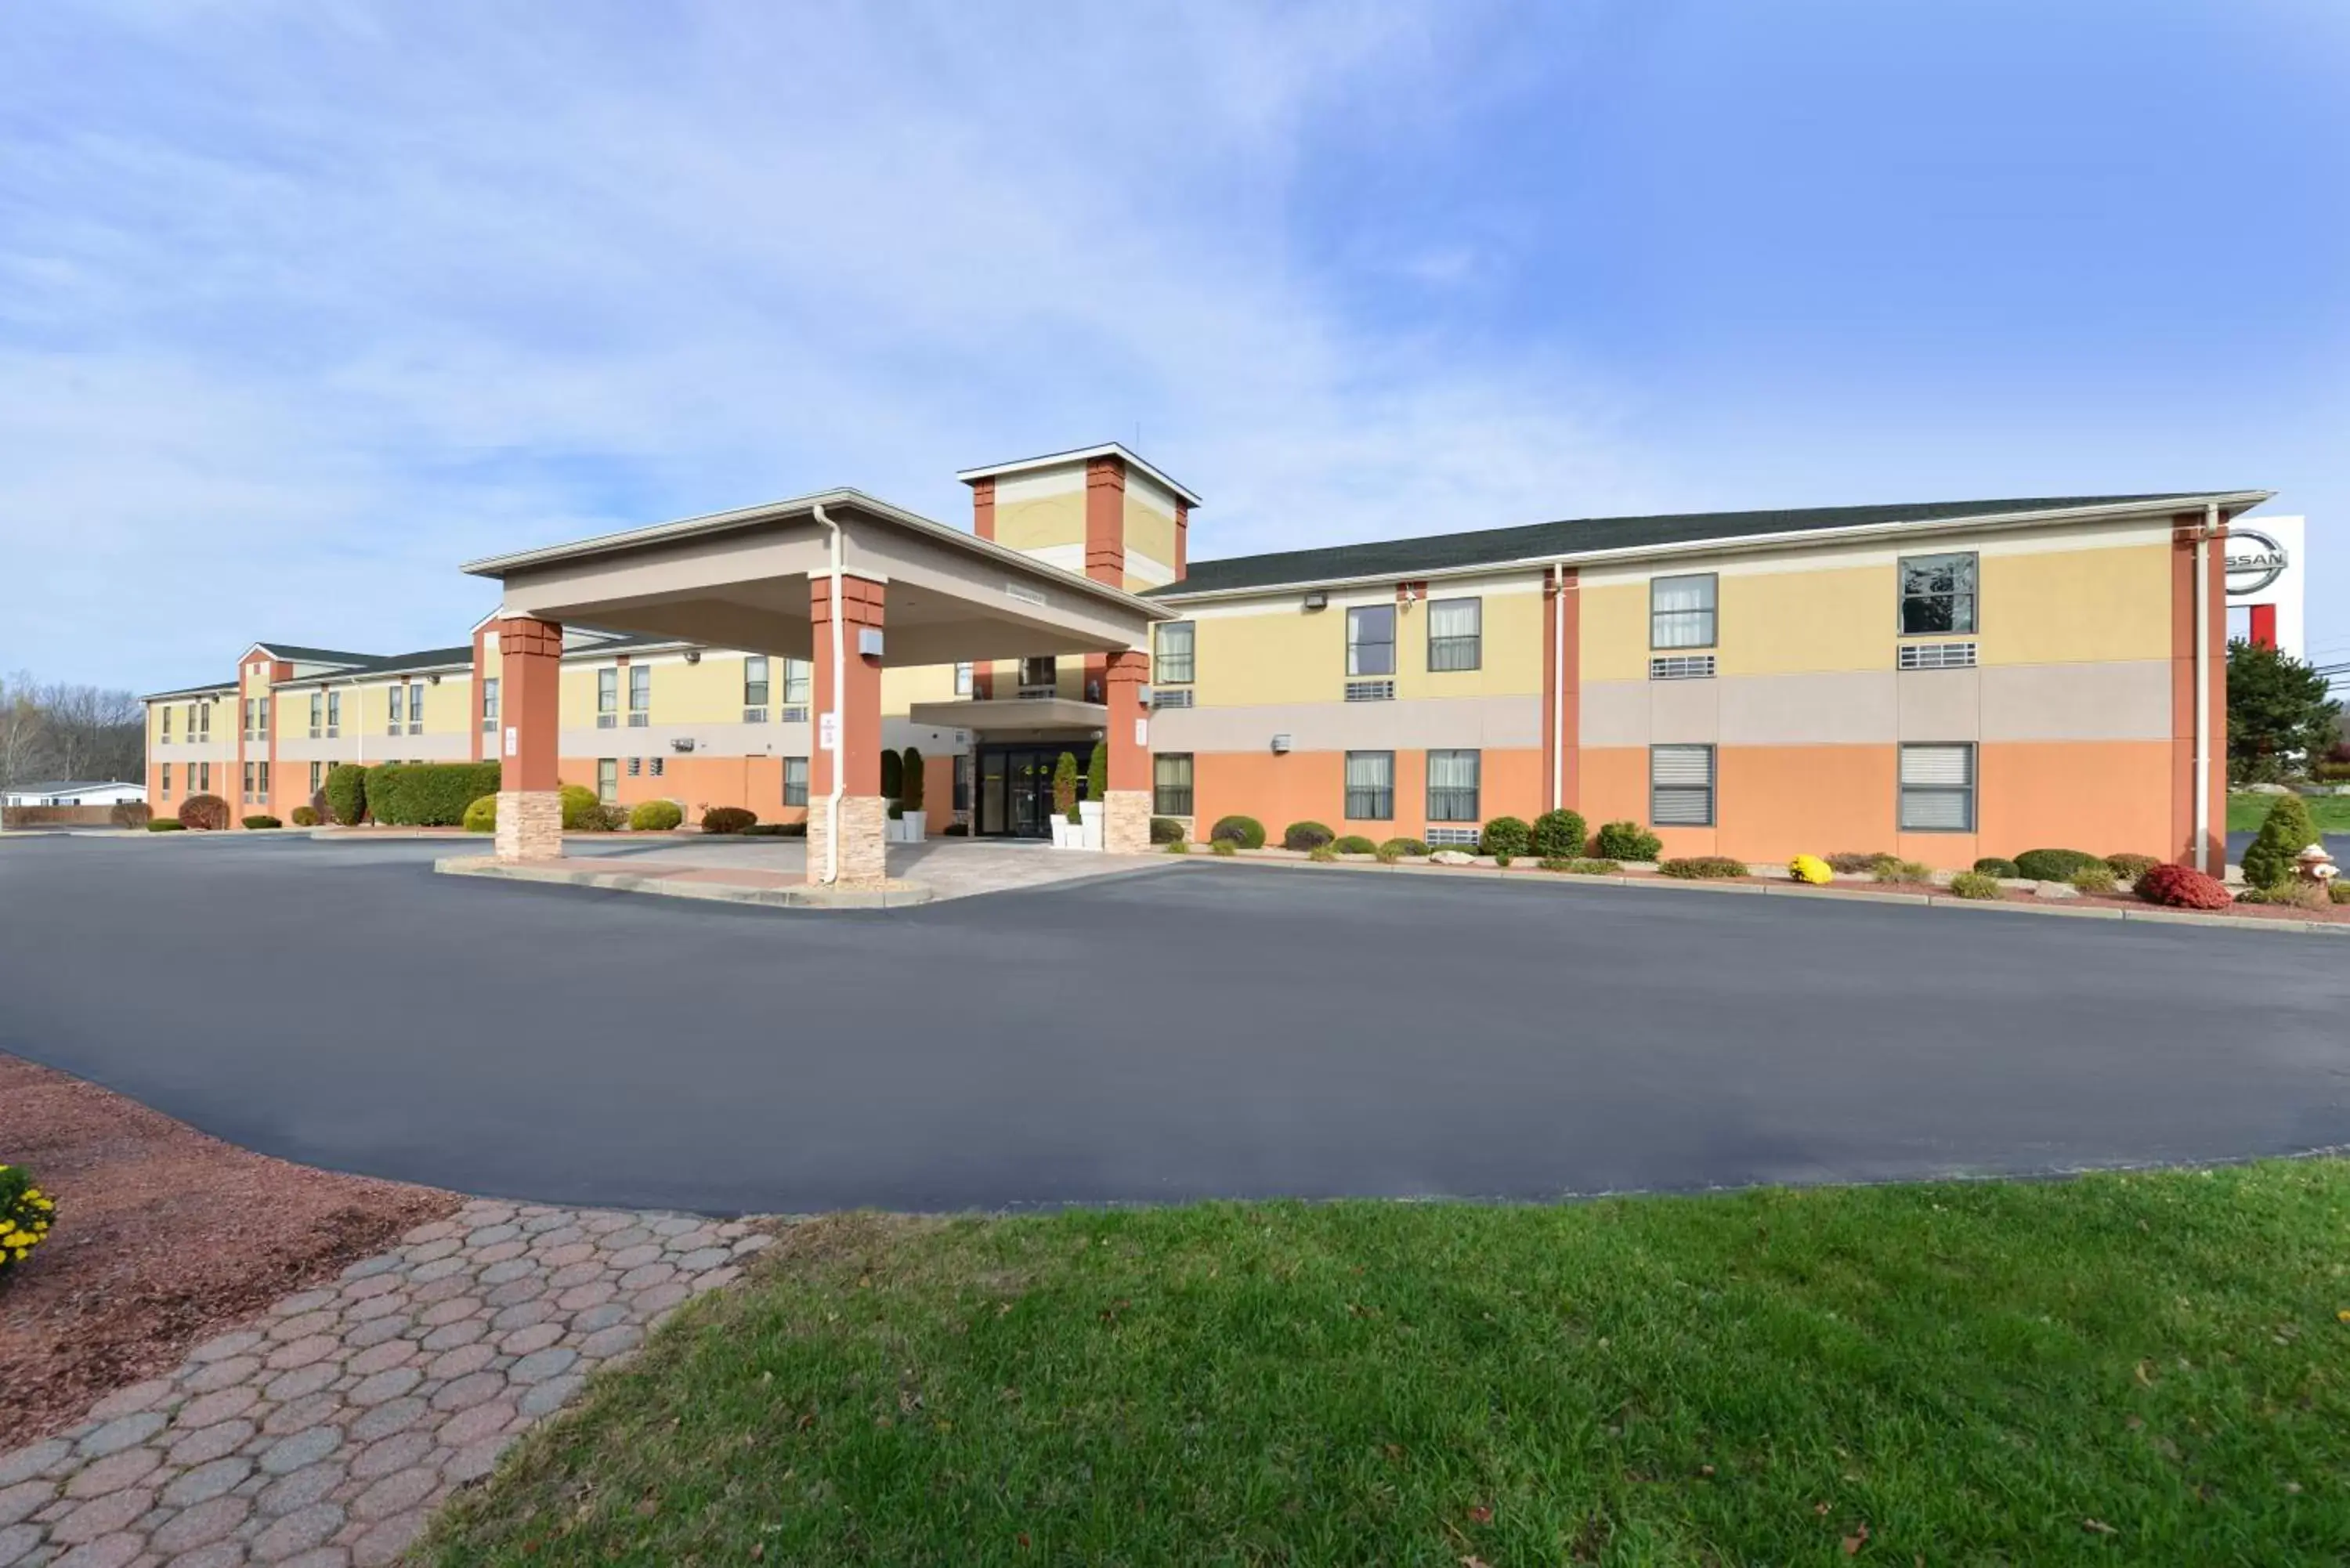 Property Building in Best Western North Attleboro - Providence Beltway